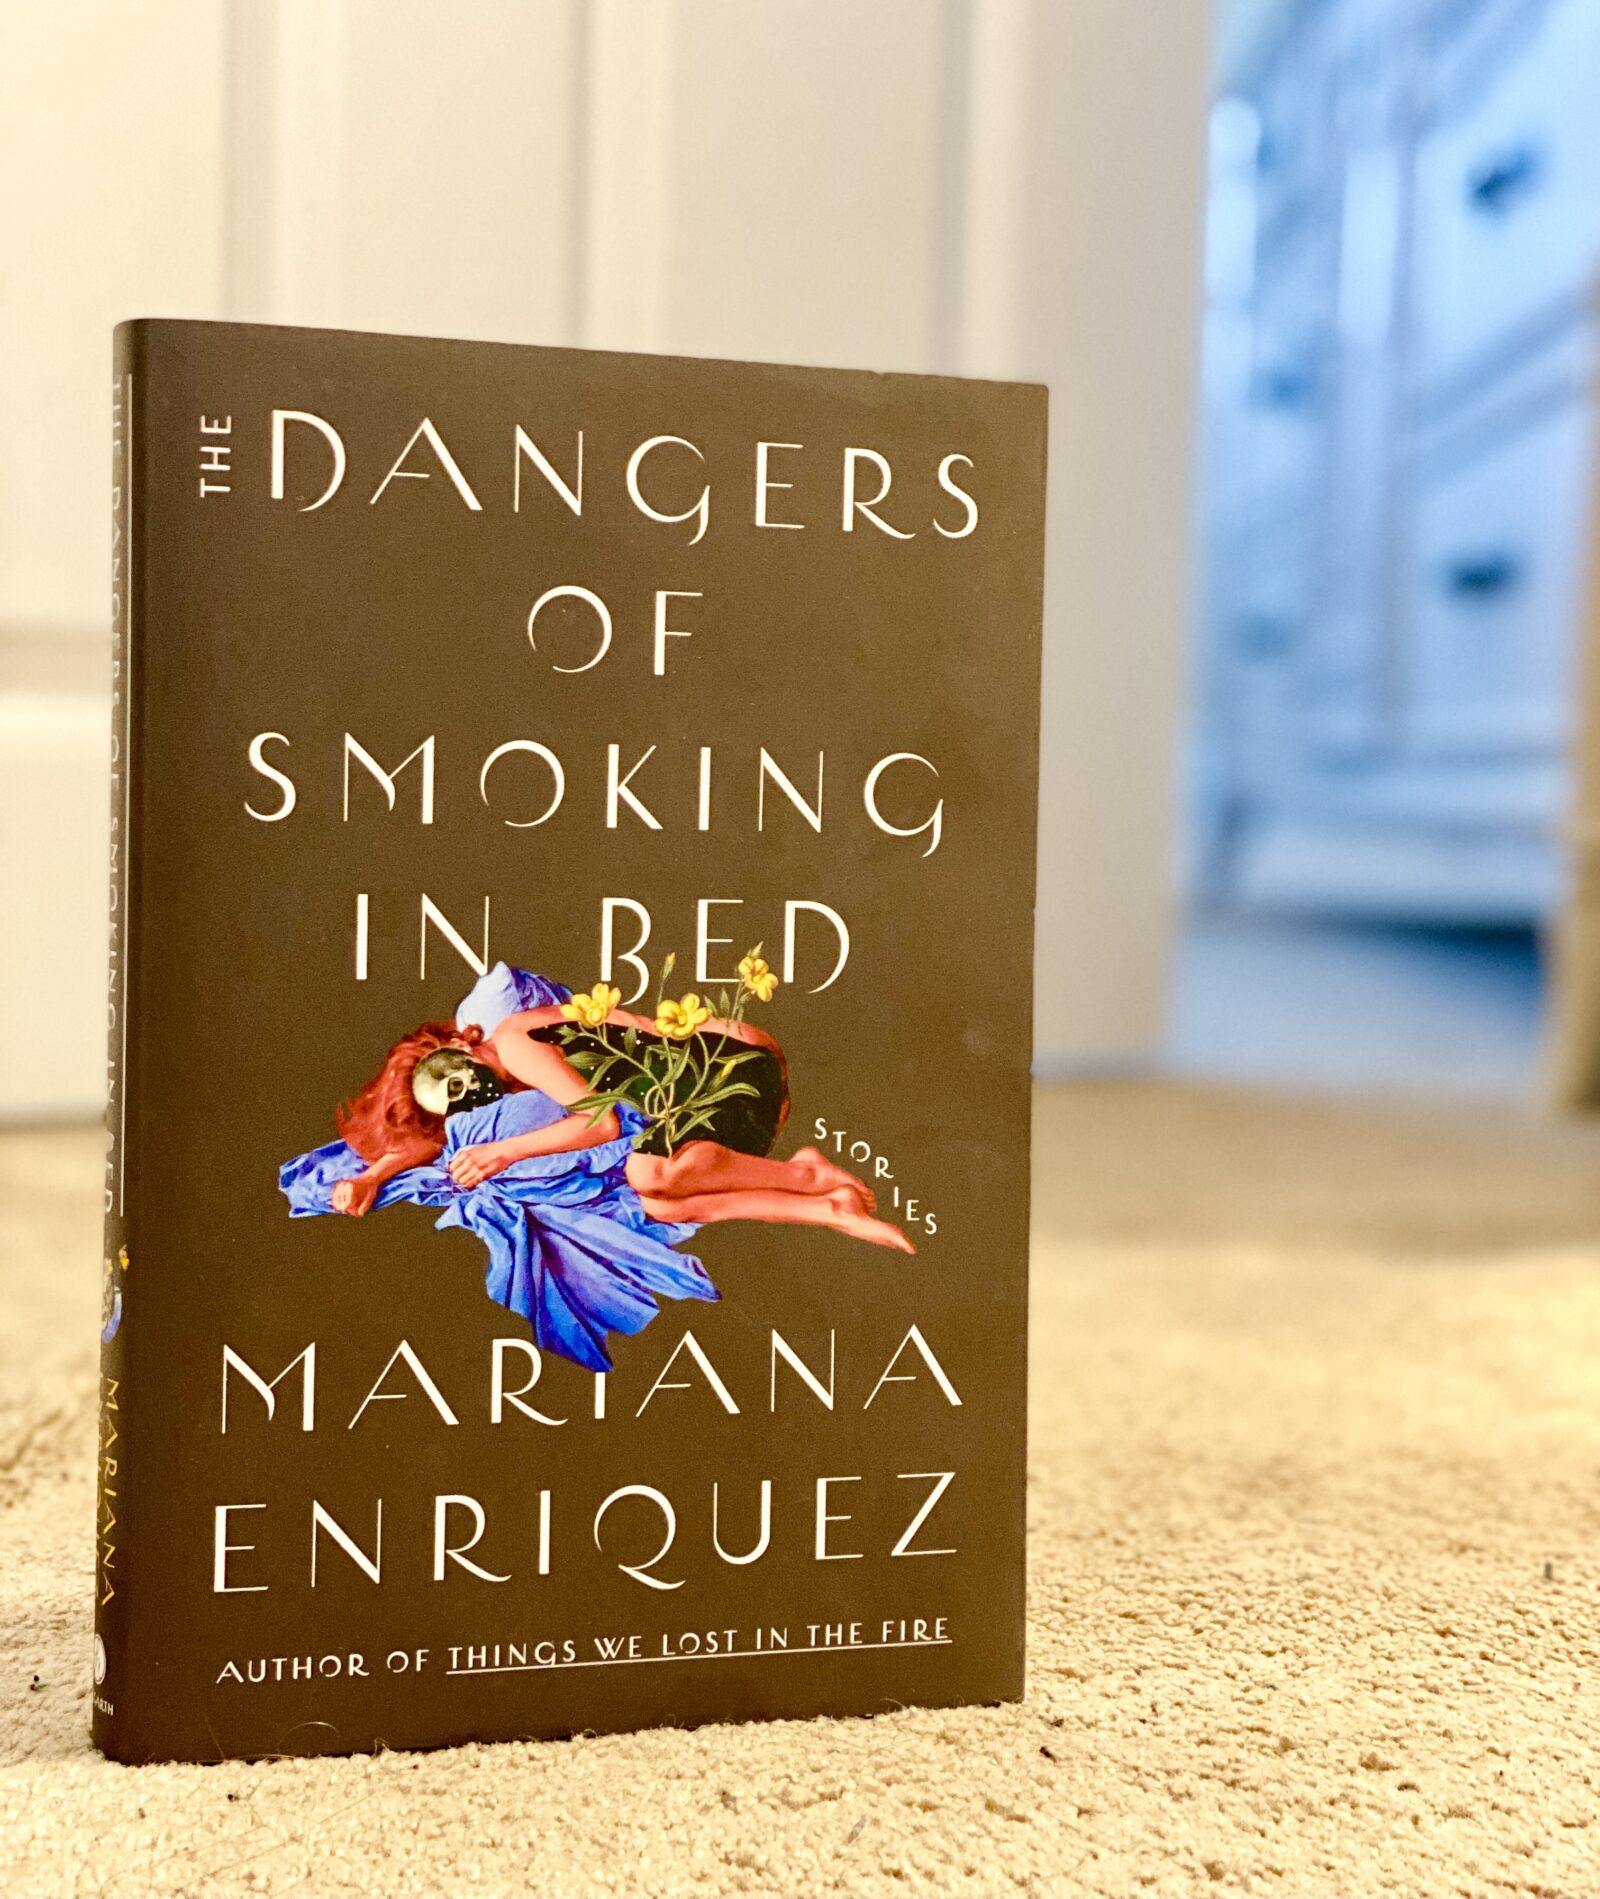 the dangers of smoking in bed by mariana enriquez